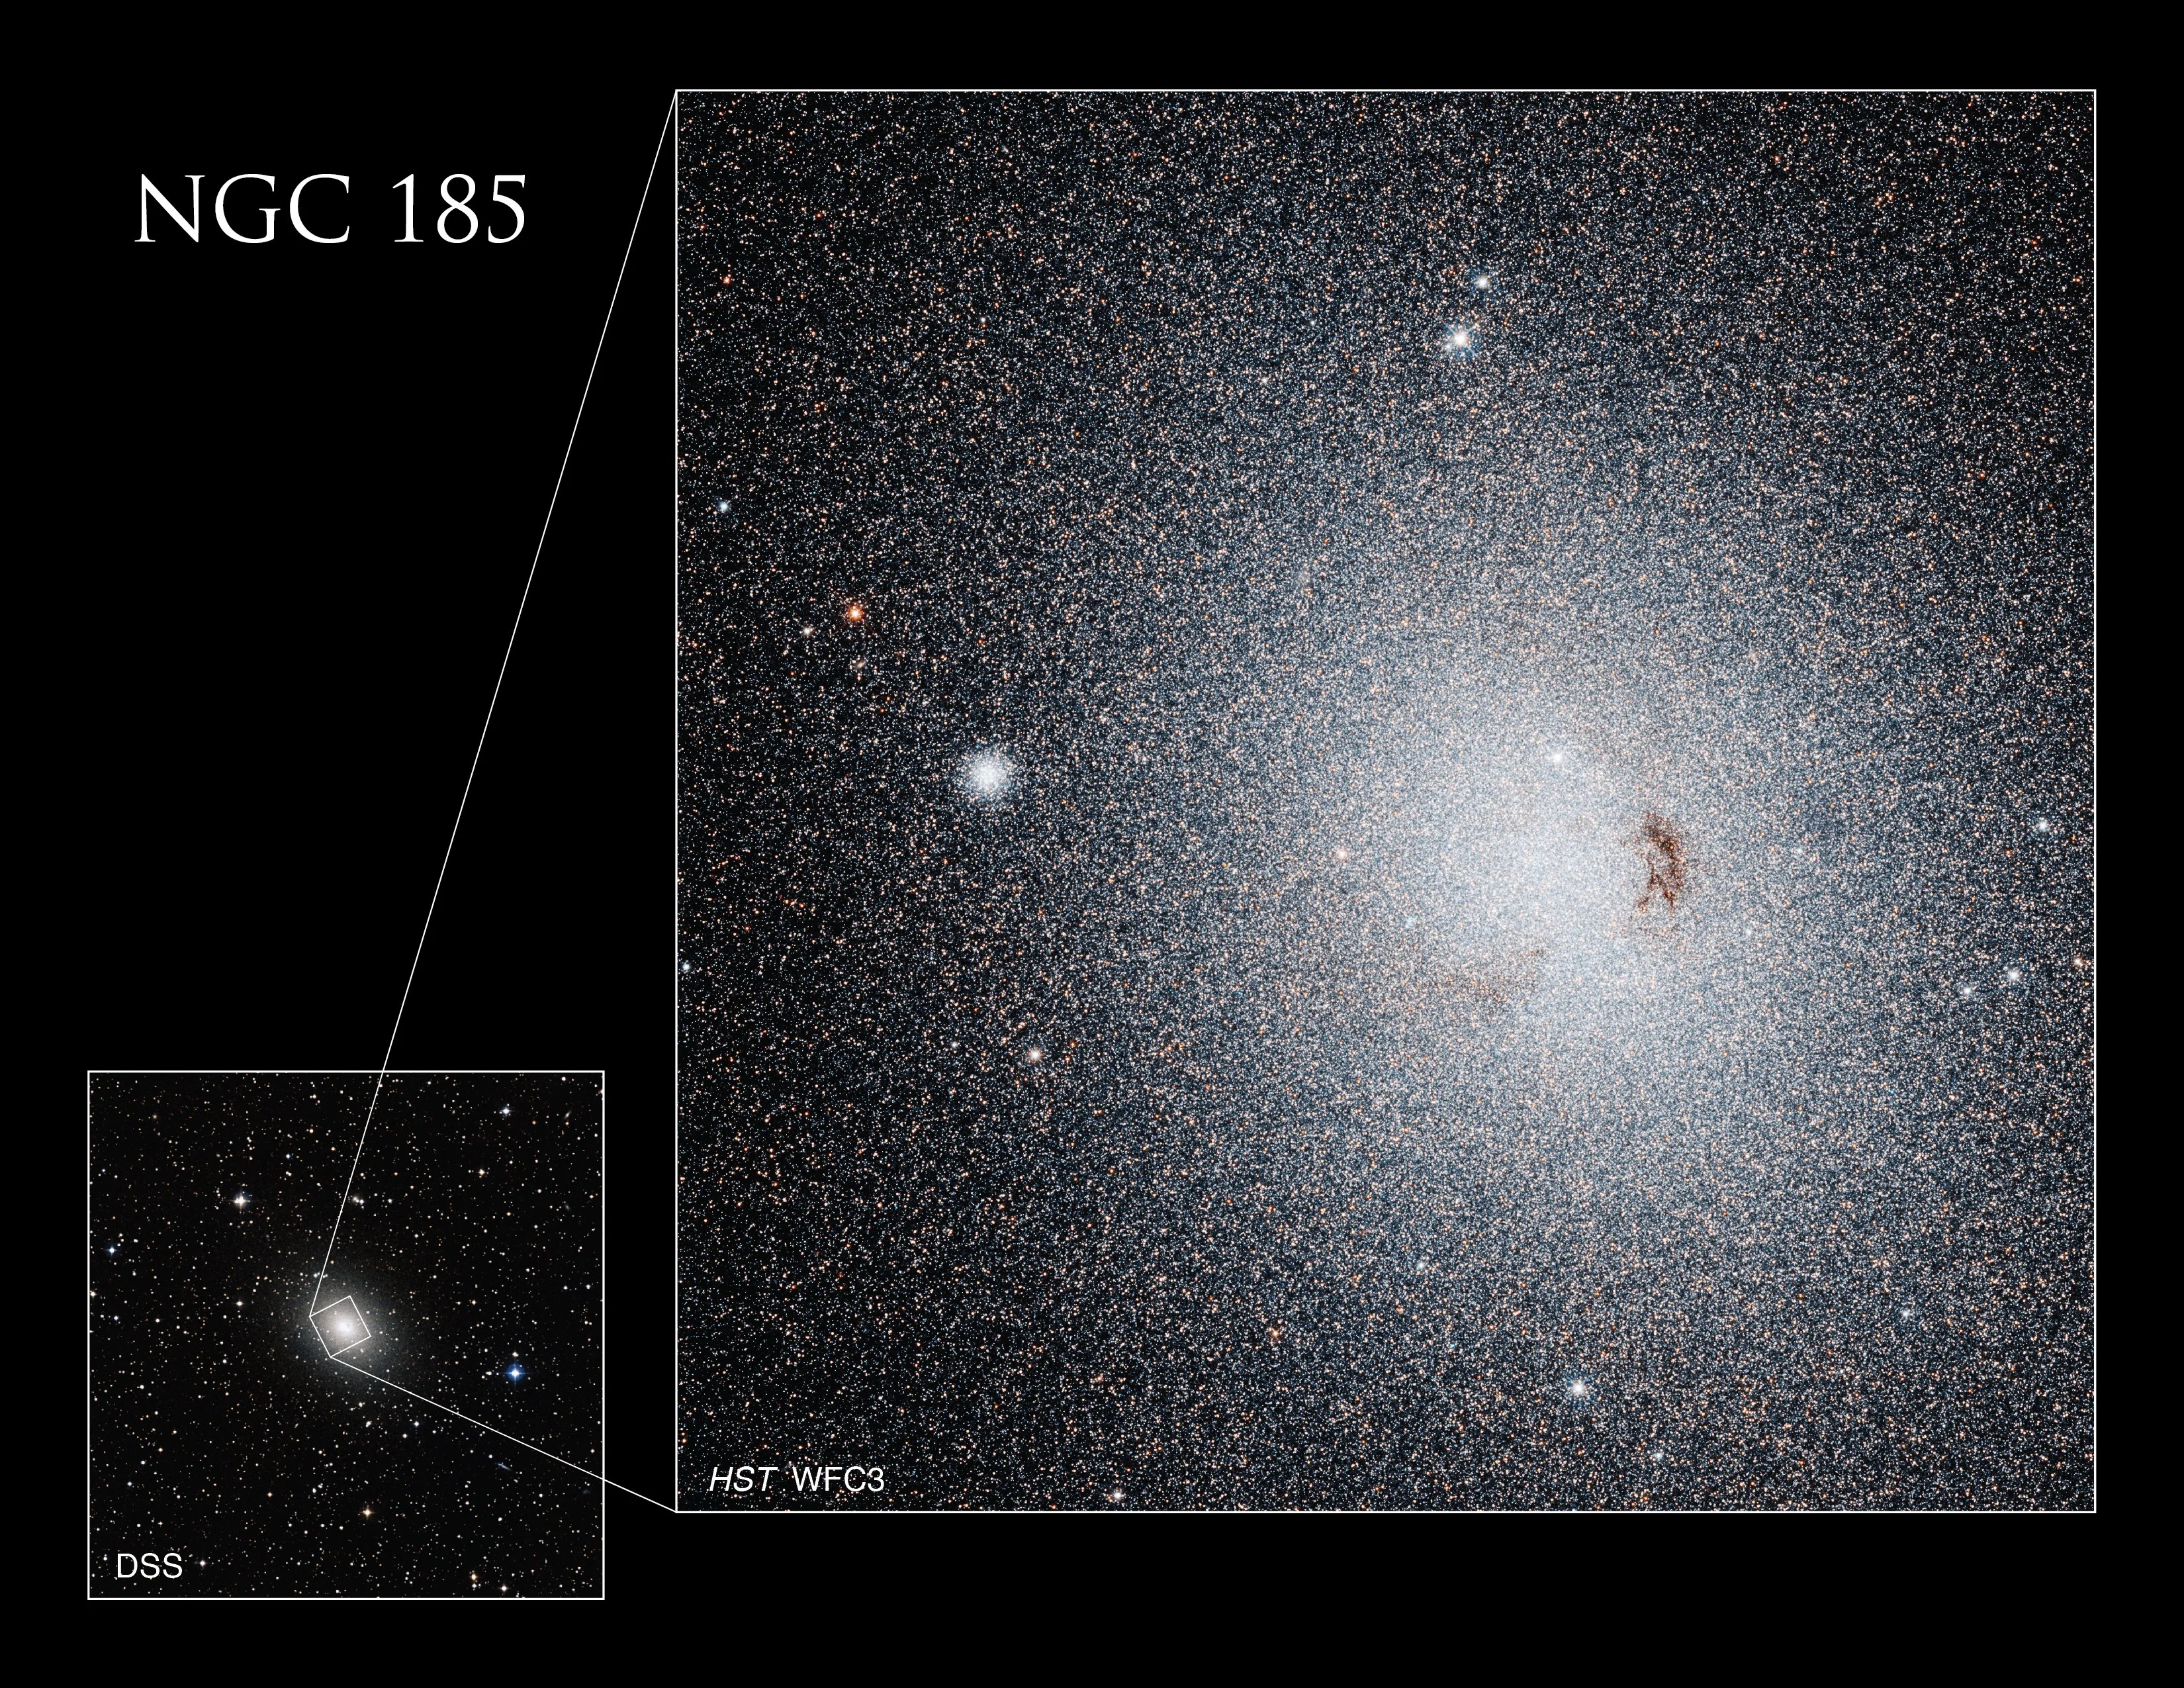 The ground-based image of Caldwell 18 (NGC 185) from the Digitized Sky Survey (DSS), shown in the bottom left, includes a white square that outlines the area of the galaxy imaged by Hubble’s Wide Field Camera 3 (WFC3).